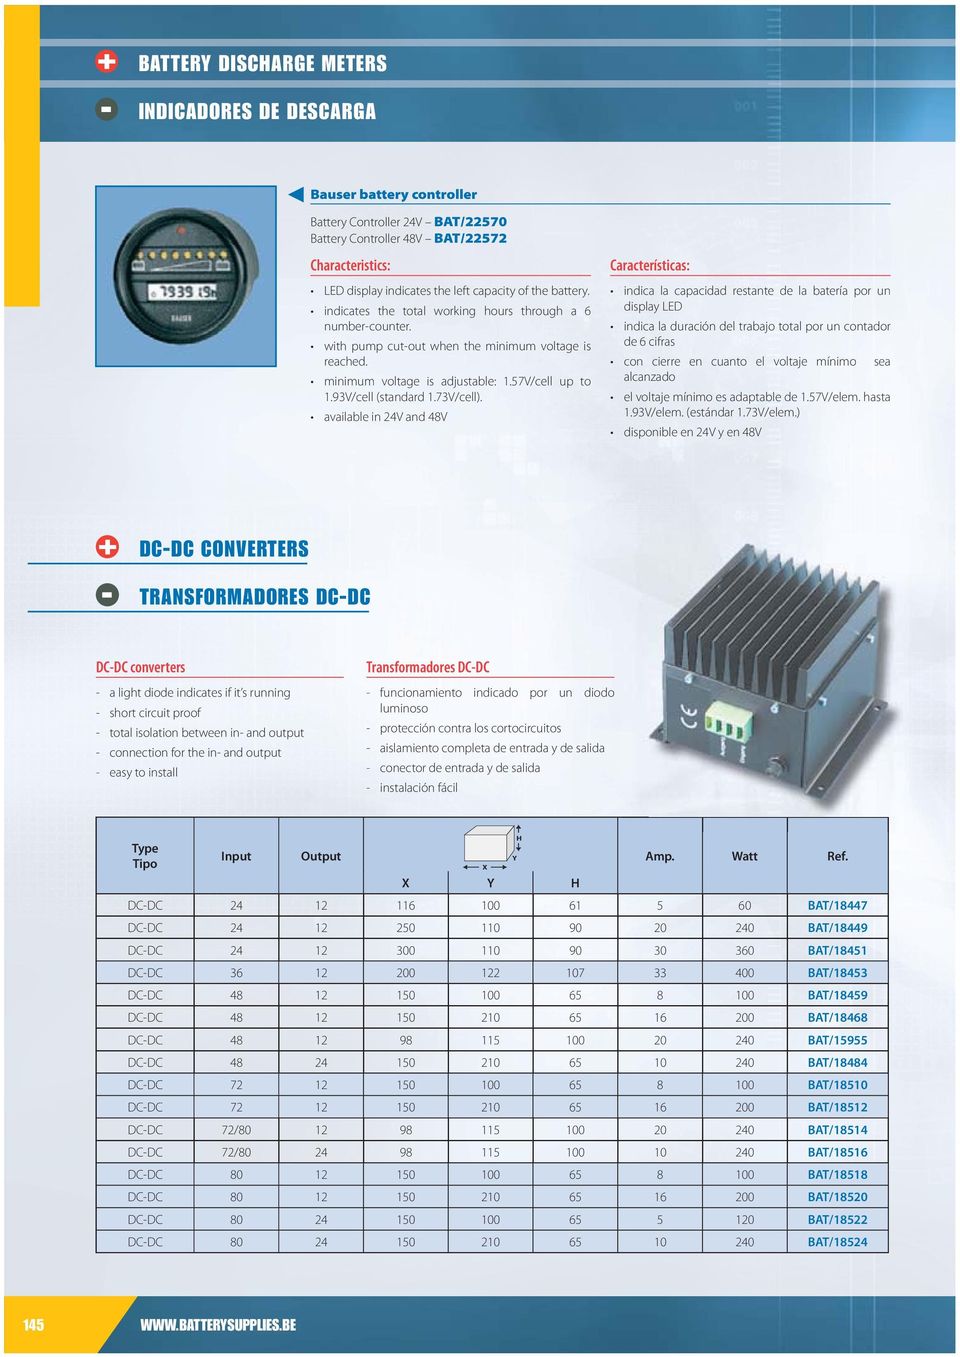 ) DCDC CONVERTERS TRANSFORMADORES DCDC DCDC converters a light diode indicates if it s running short circuit proof total isolation between in and output connection for the in and output easy to